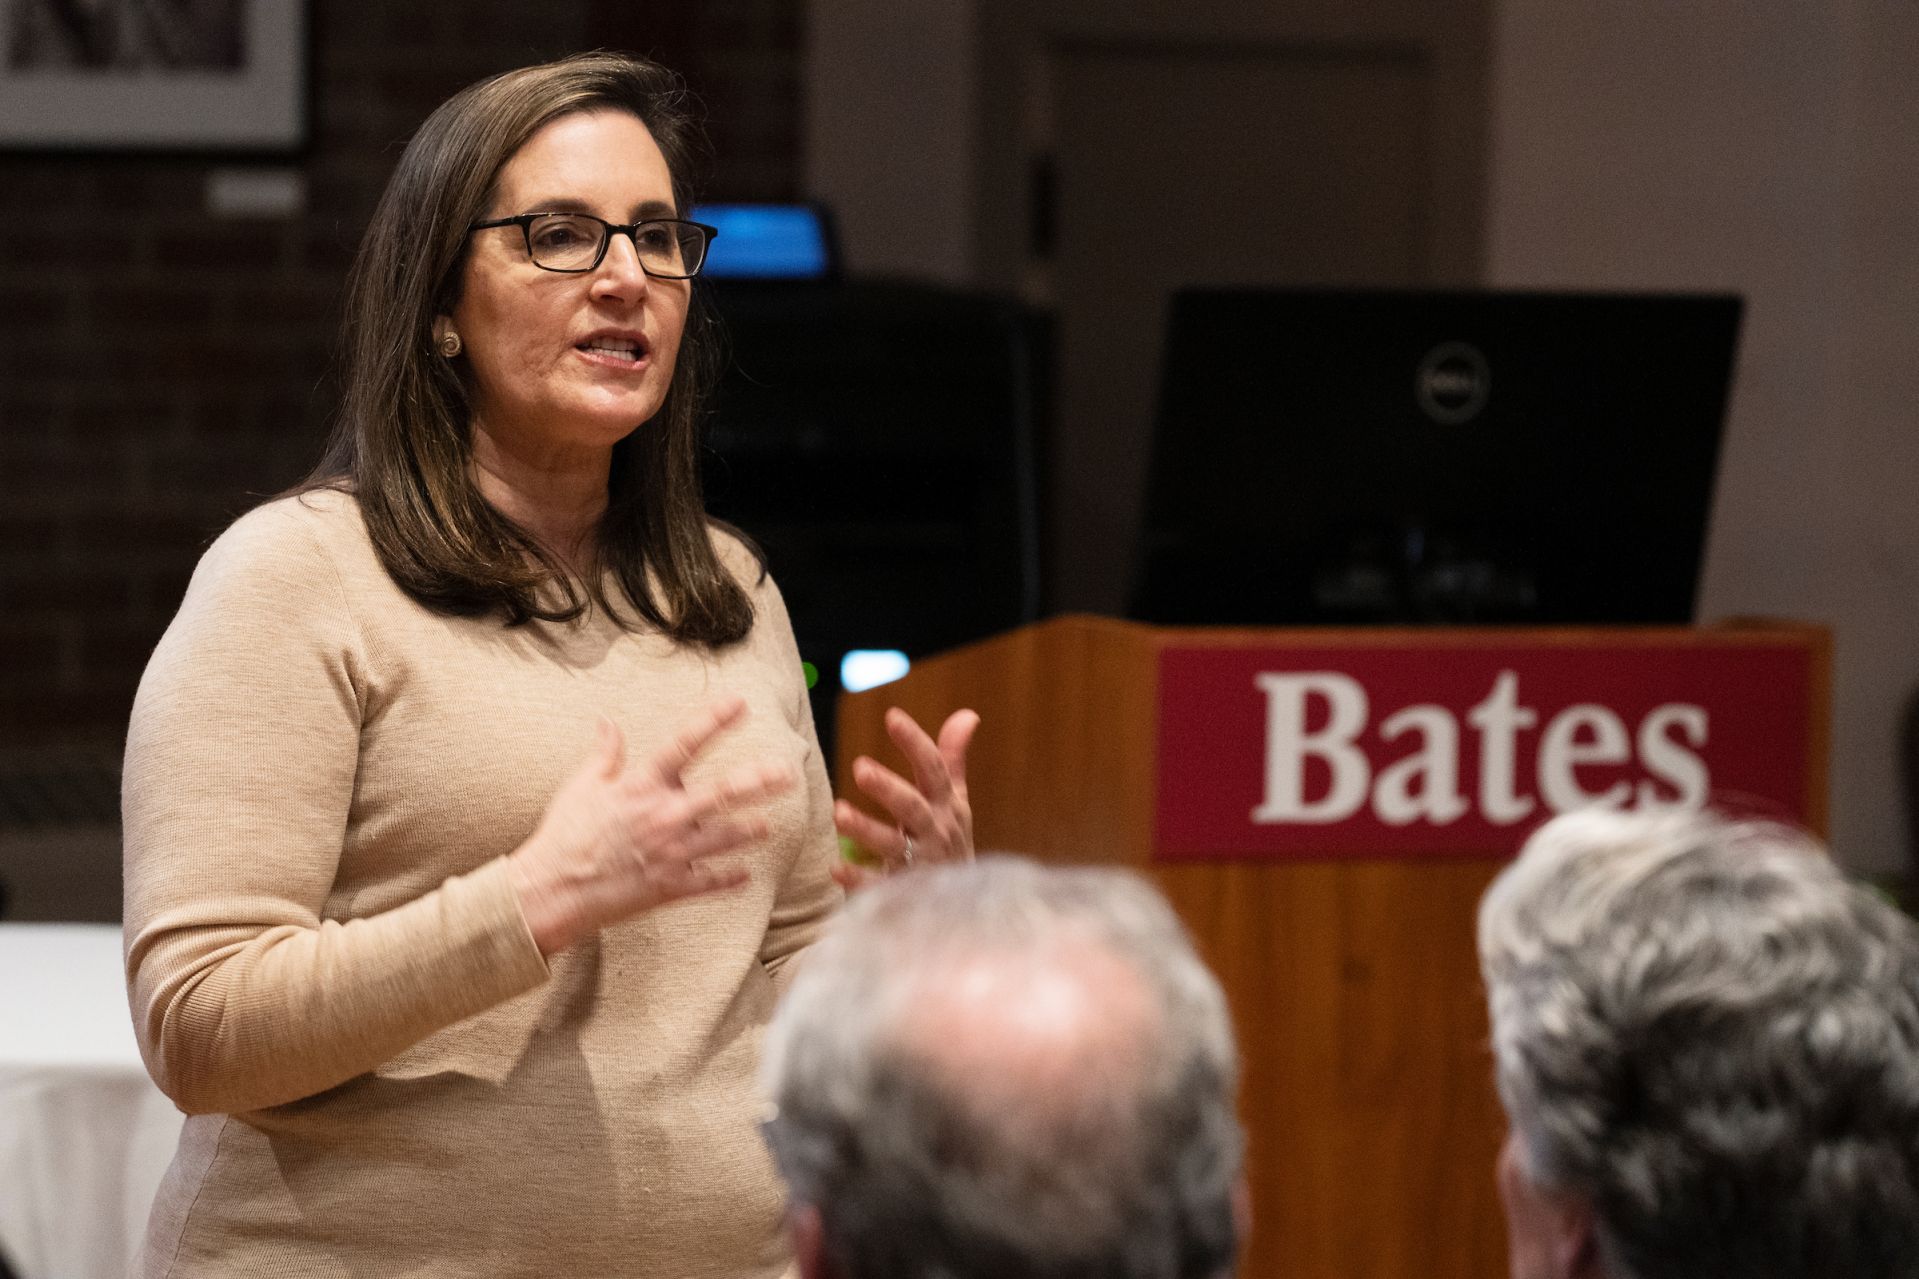 Moments from The Mueller Investigation and the Rule of Law: A talk by Joyce White Vance 82, Distinguished Professor of the Practice of Law, Culverhouse School of Law at the University of Alabama, Former U.S. Attorney for the Northern District of Alabama, frequent legal commentator for MSNBC, at the Muskie Archives on March 21, 2019.Vance is a former U.S. Attorney for the Northern District of Alabama and frequent legal commentator for MSNBC. An entry in the Harward Center for Community Partnerships Theory Into Practice series. FMI 207-786-6202.Muskie Archives